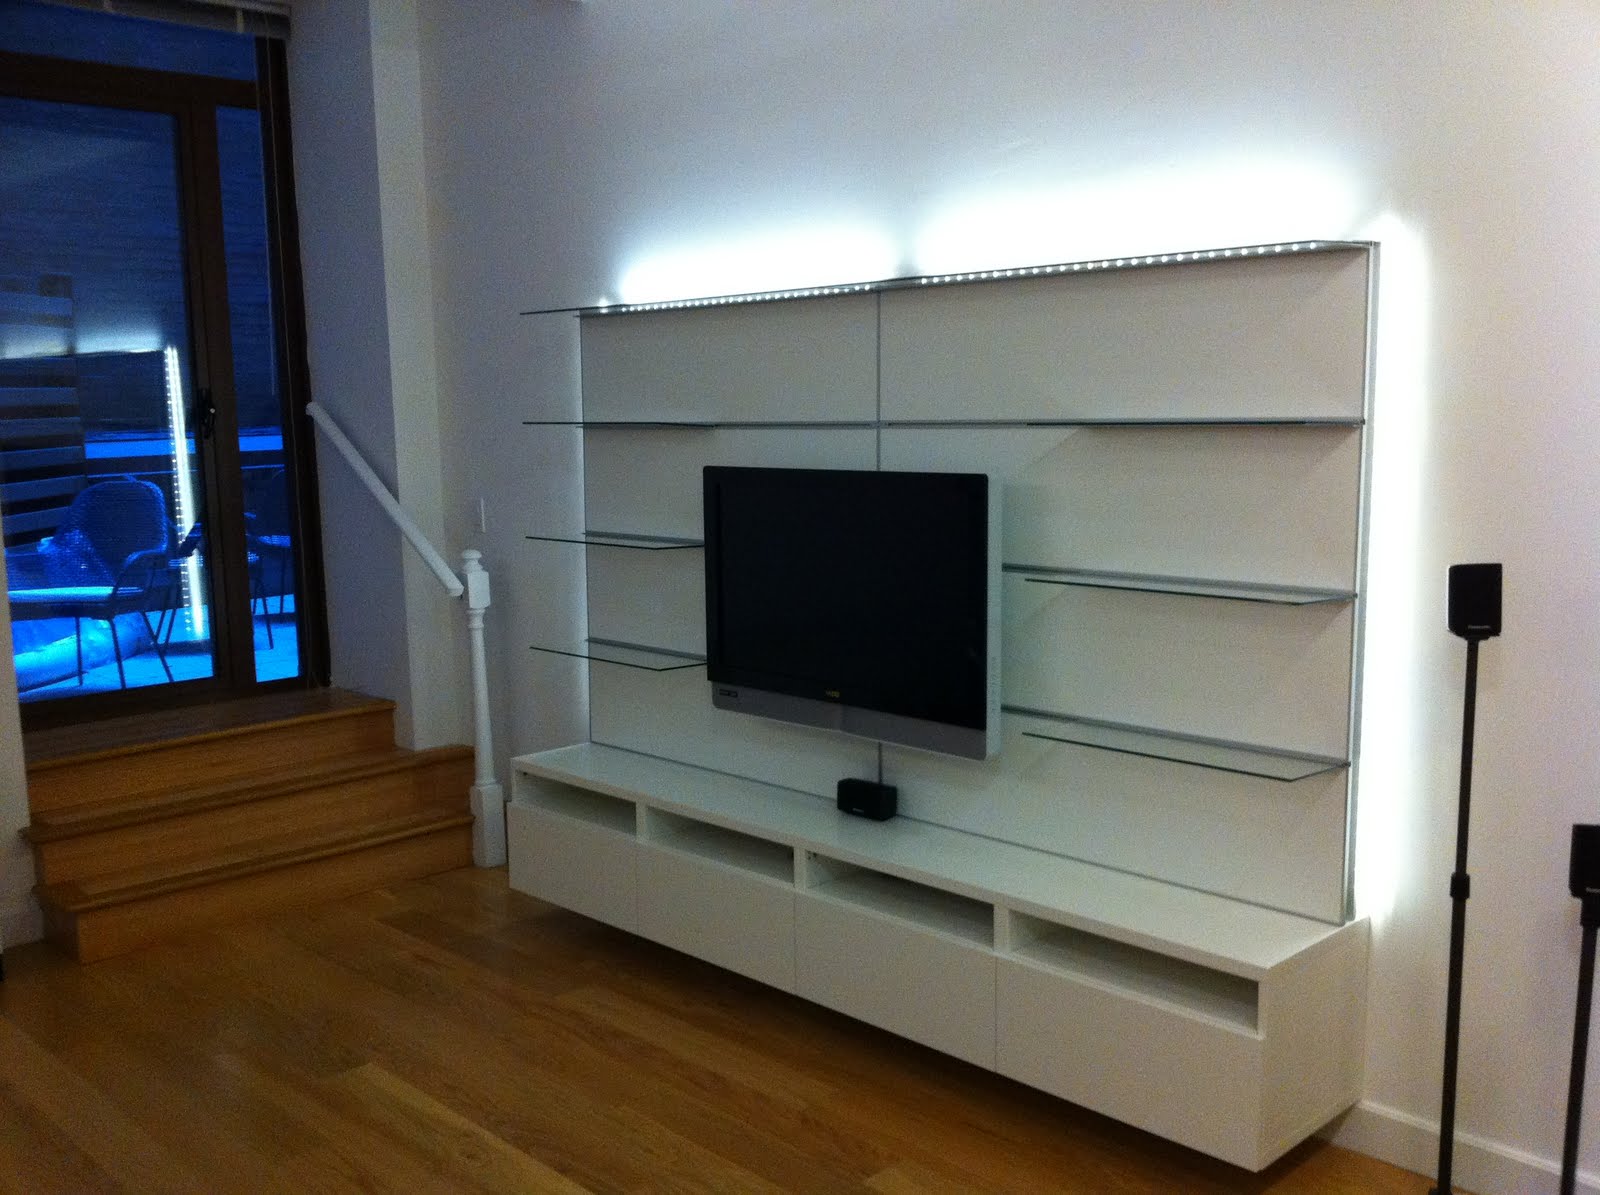 Furniture Assembly Service - Blog: Unofficial IKEA Furniture ...